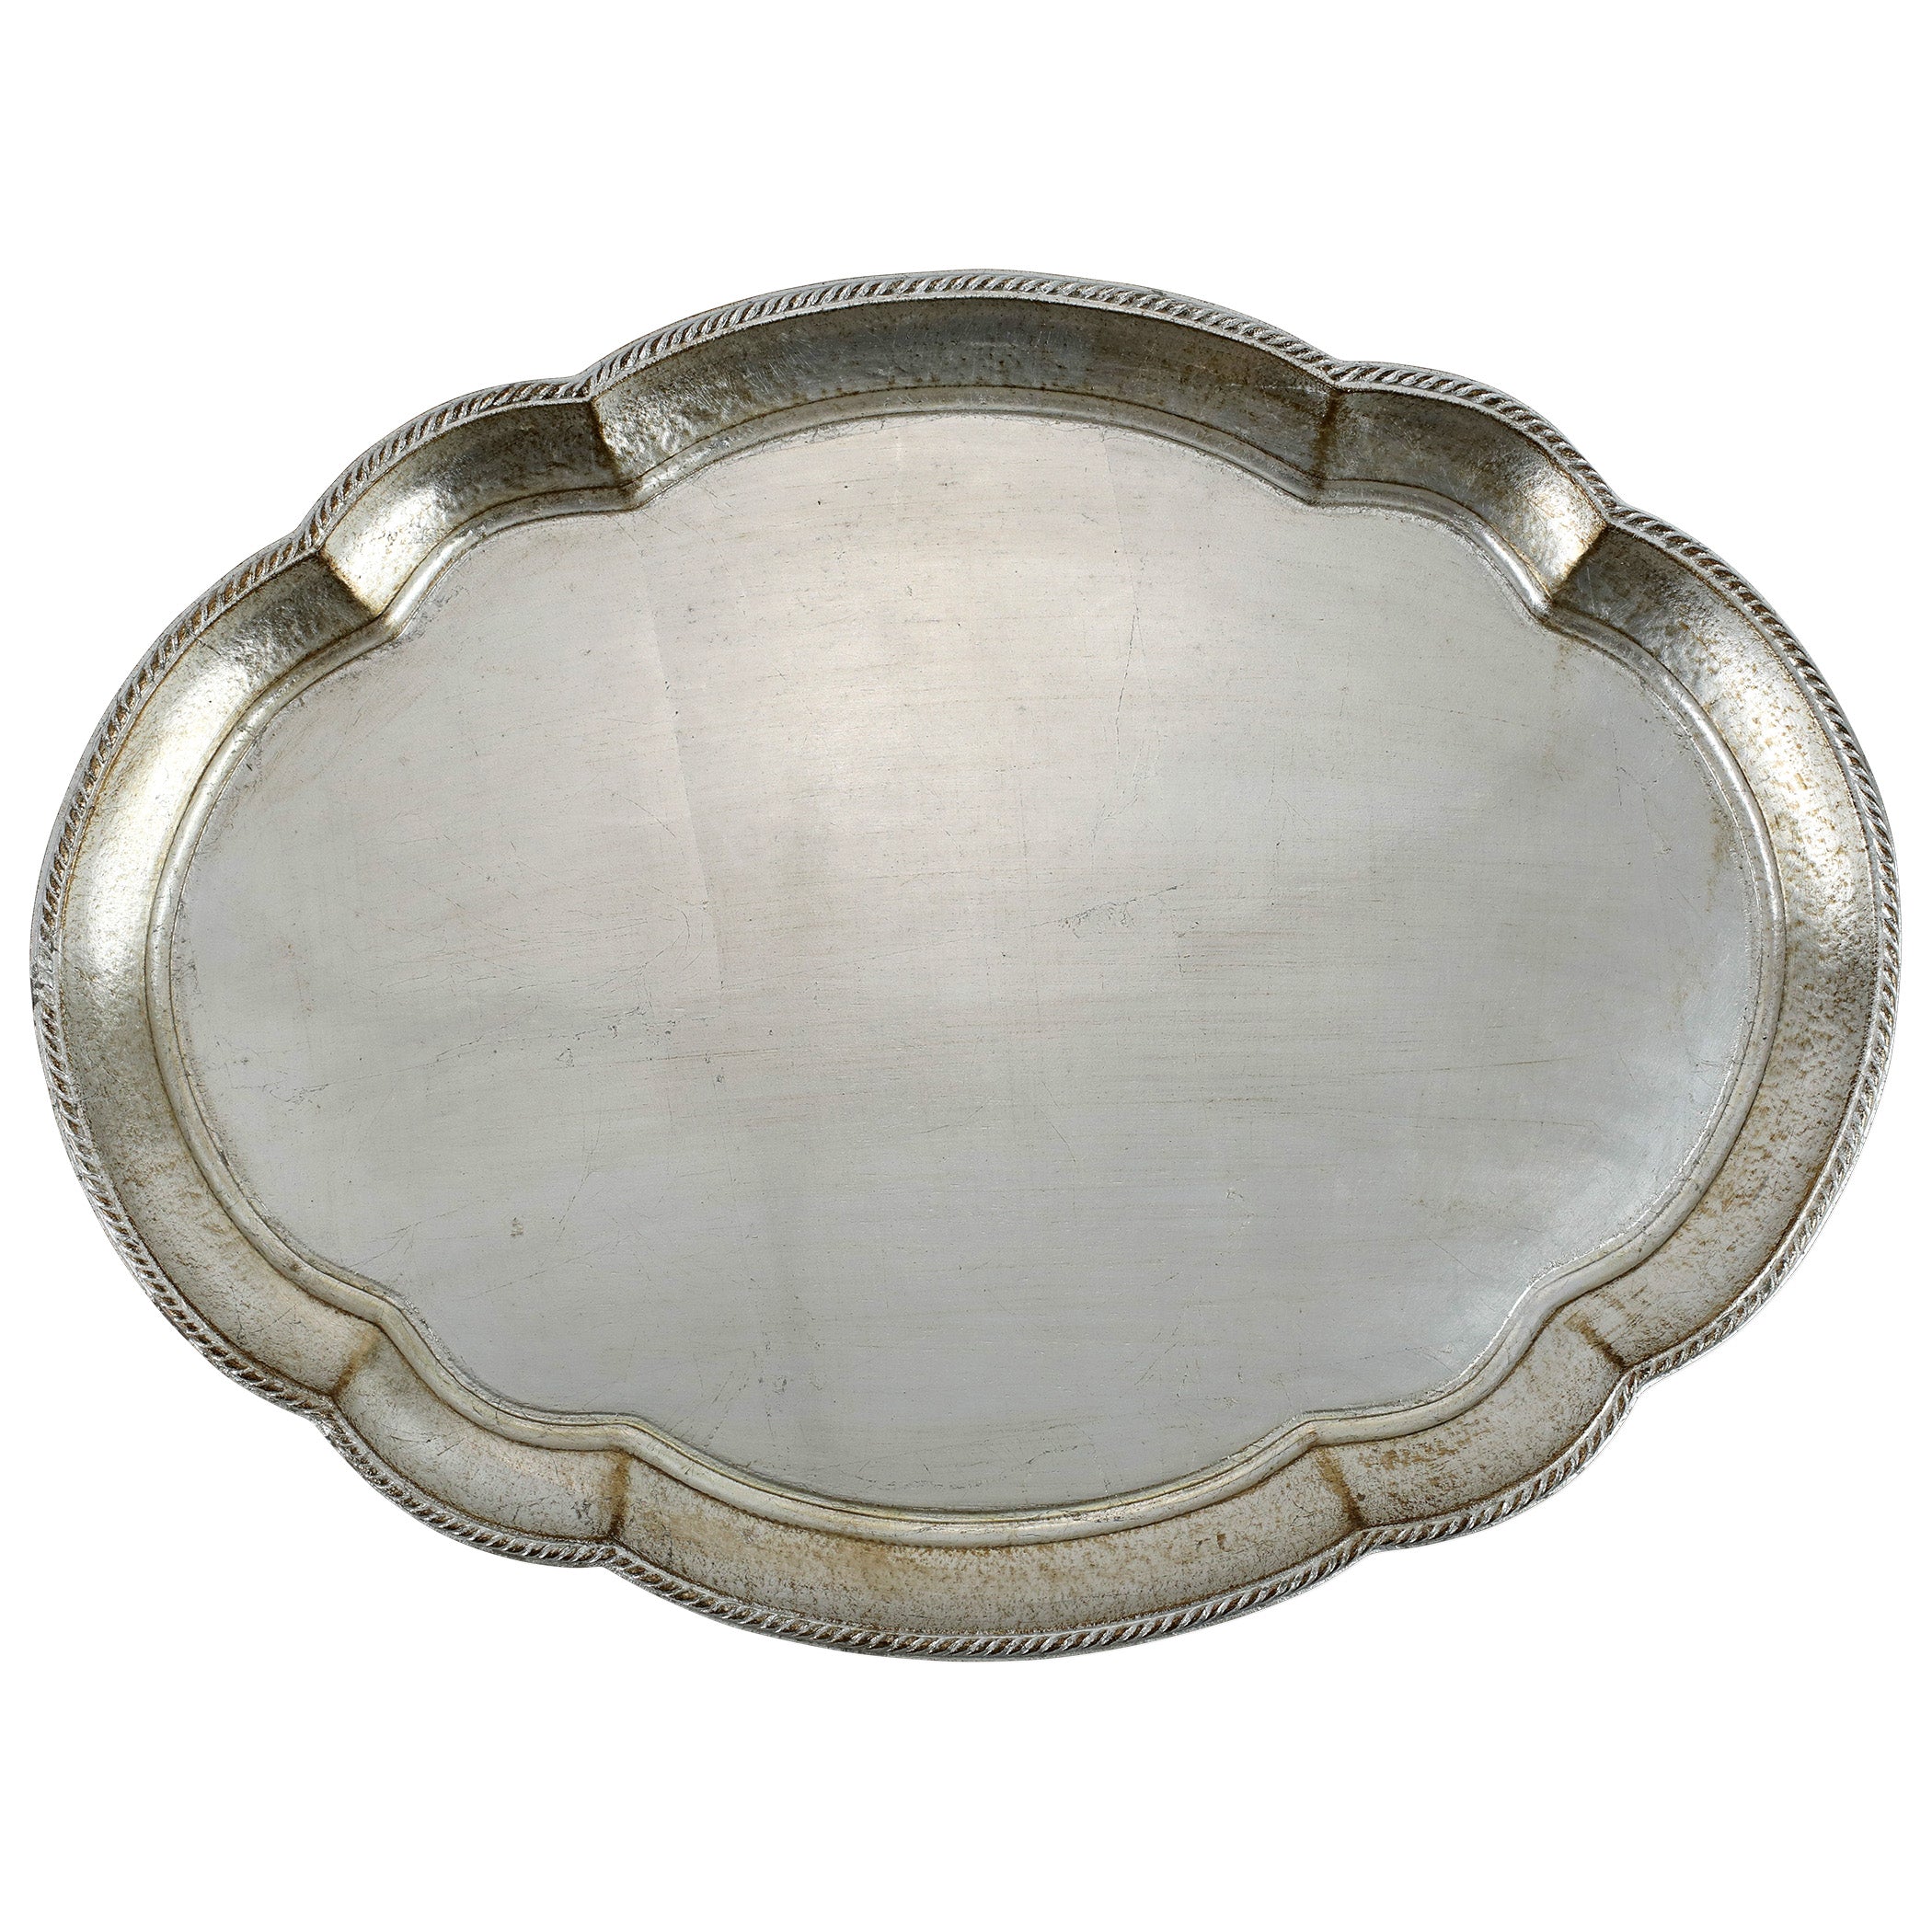 Florentine Wooden Accessories Platinum Large Oval Tray